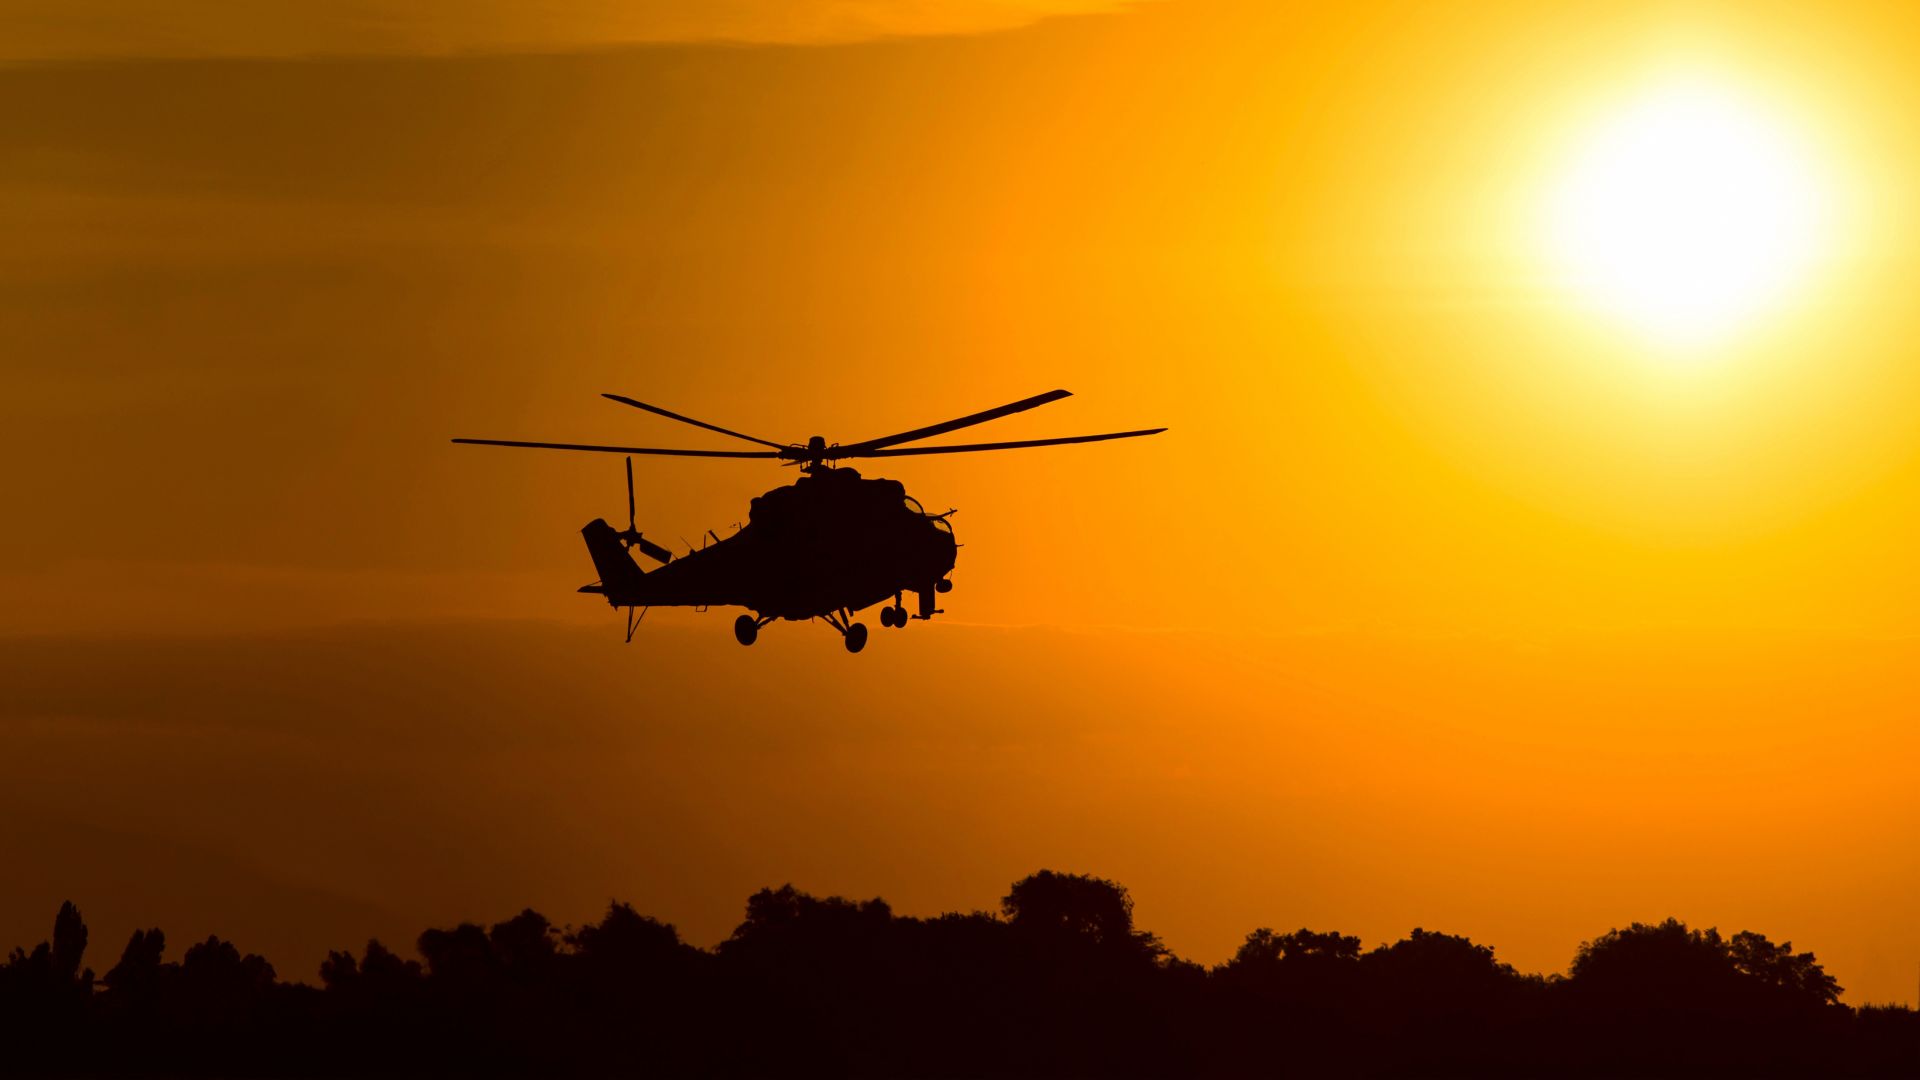 Wallpaper Mil mi 2 attack helicopter silhouette